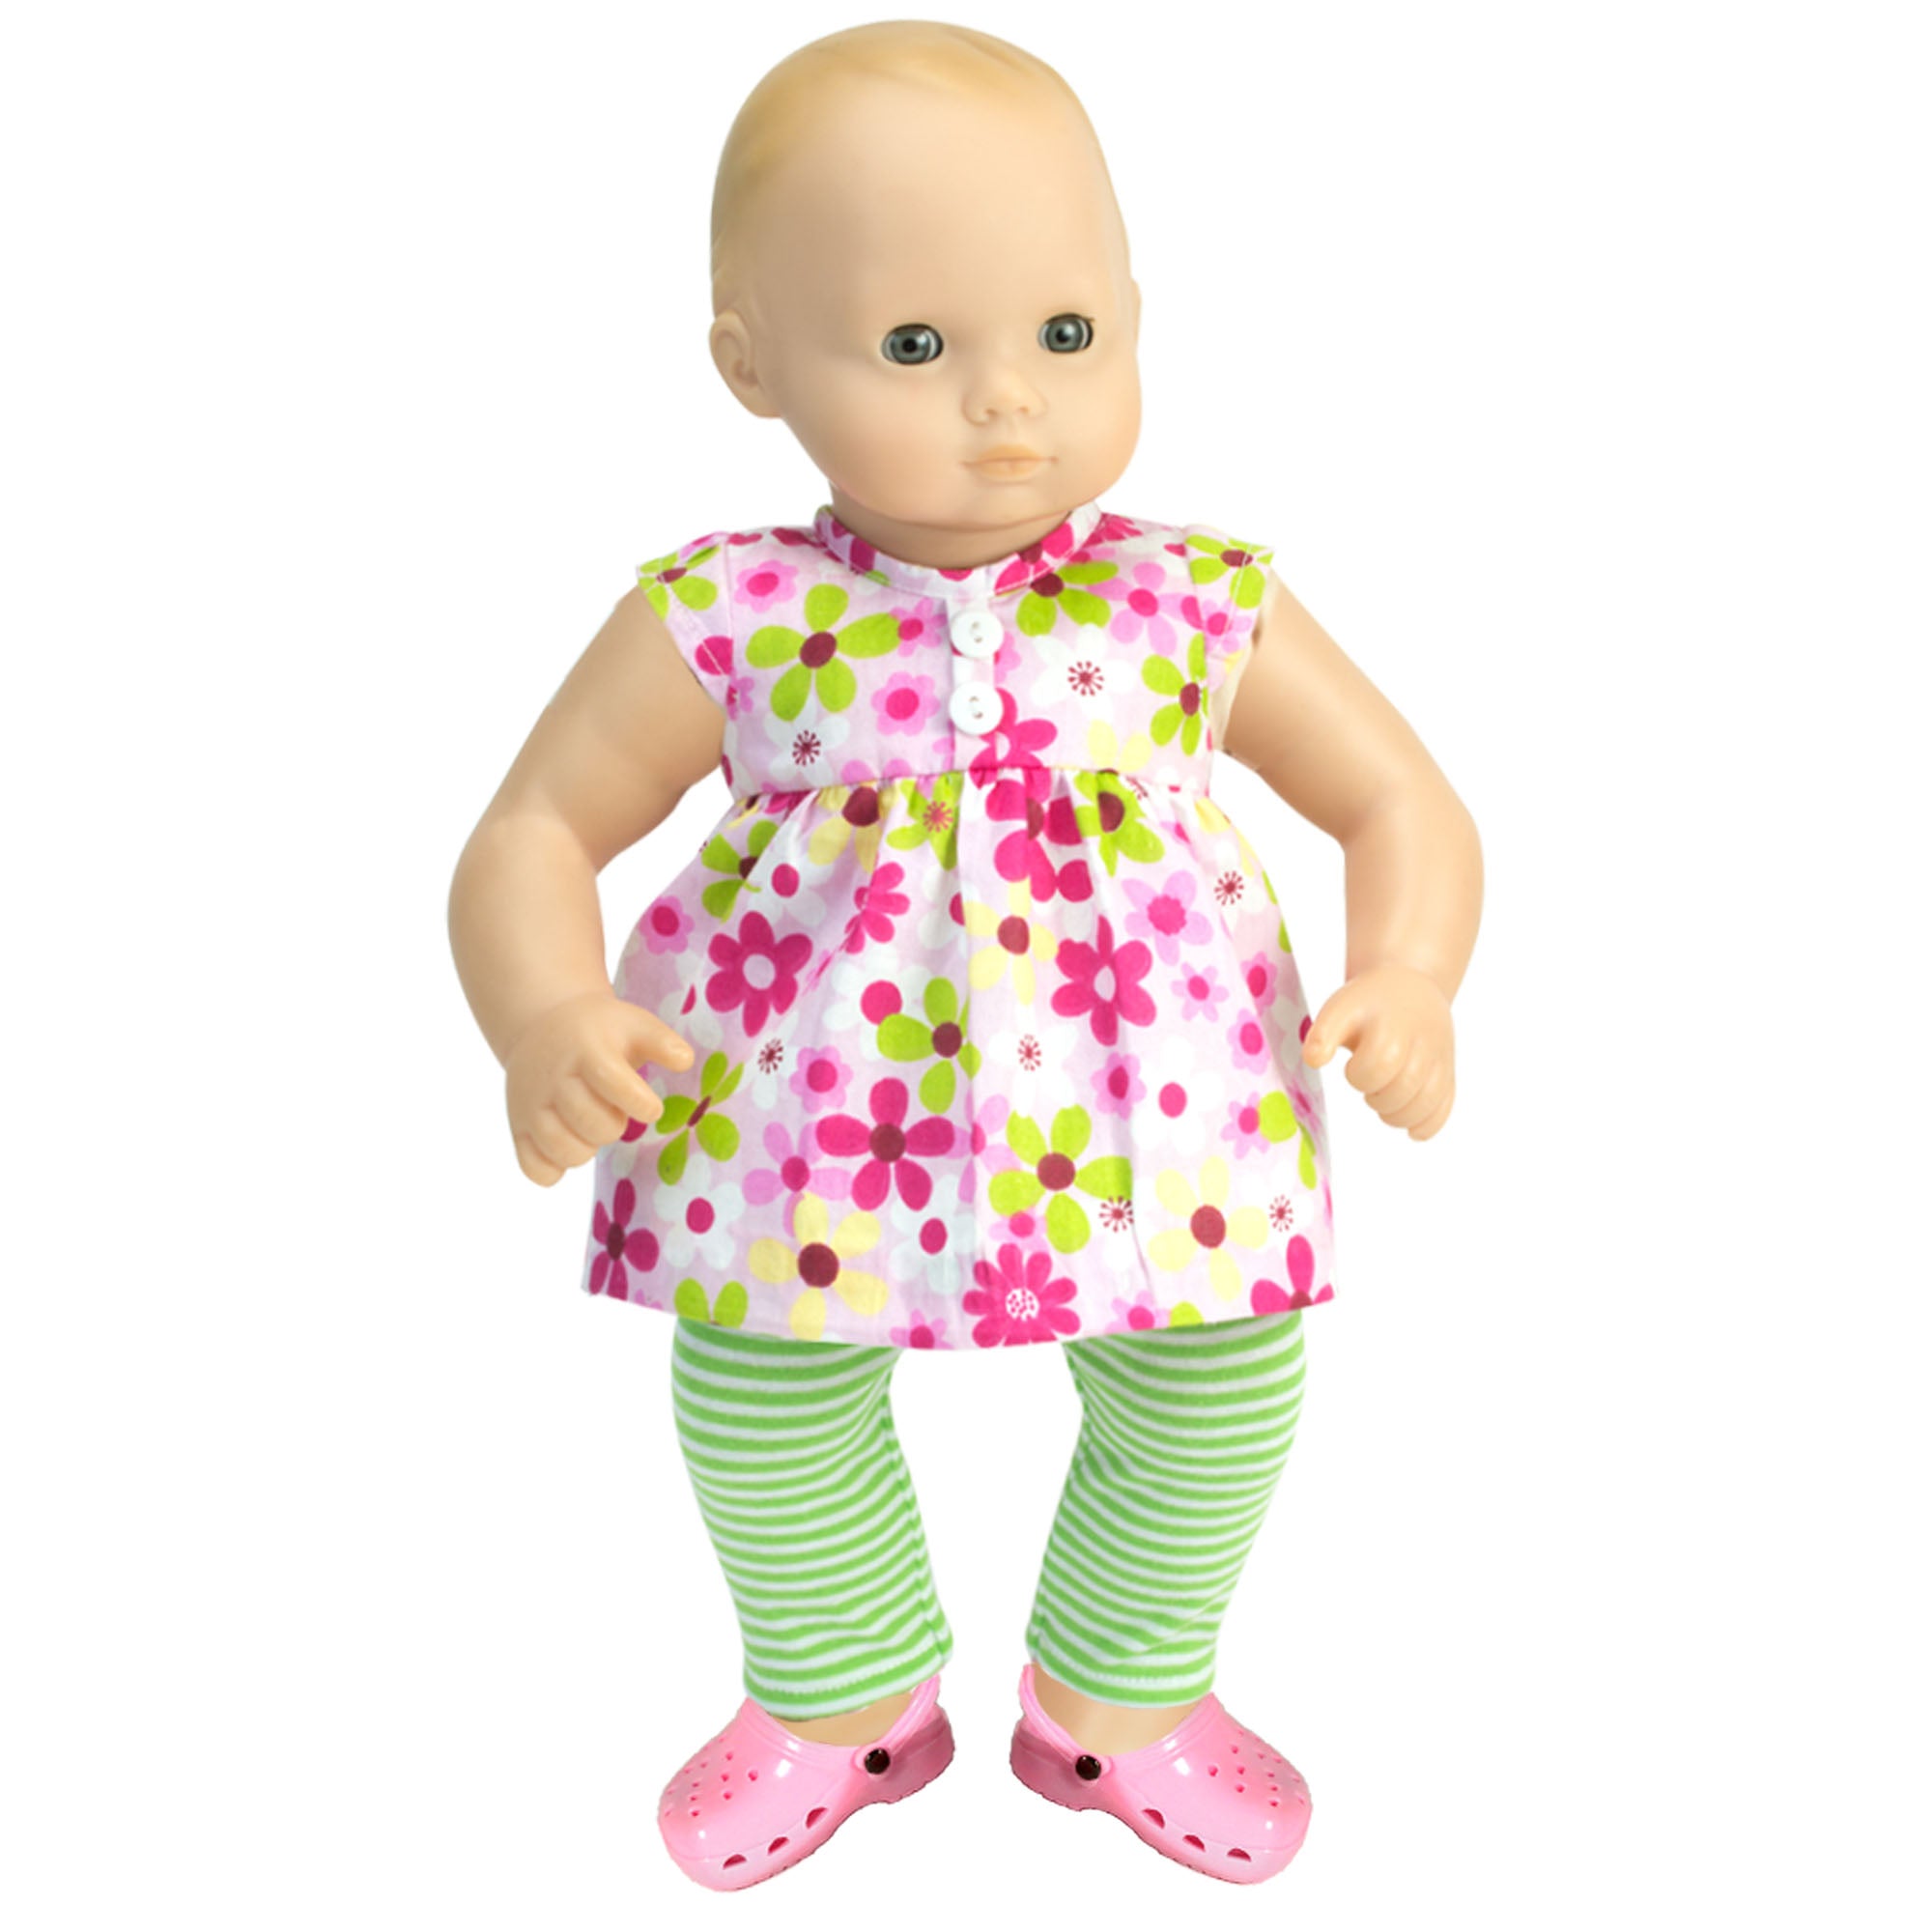 Sophia's 3 Piece Floral Outfit with Shoes Set for 15'' Dolls, Pink/Green